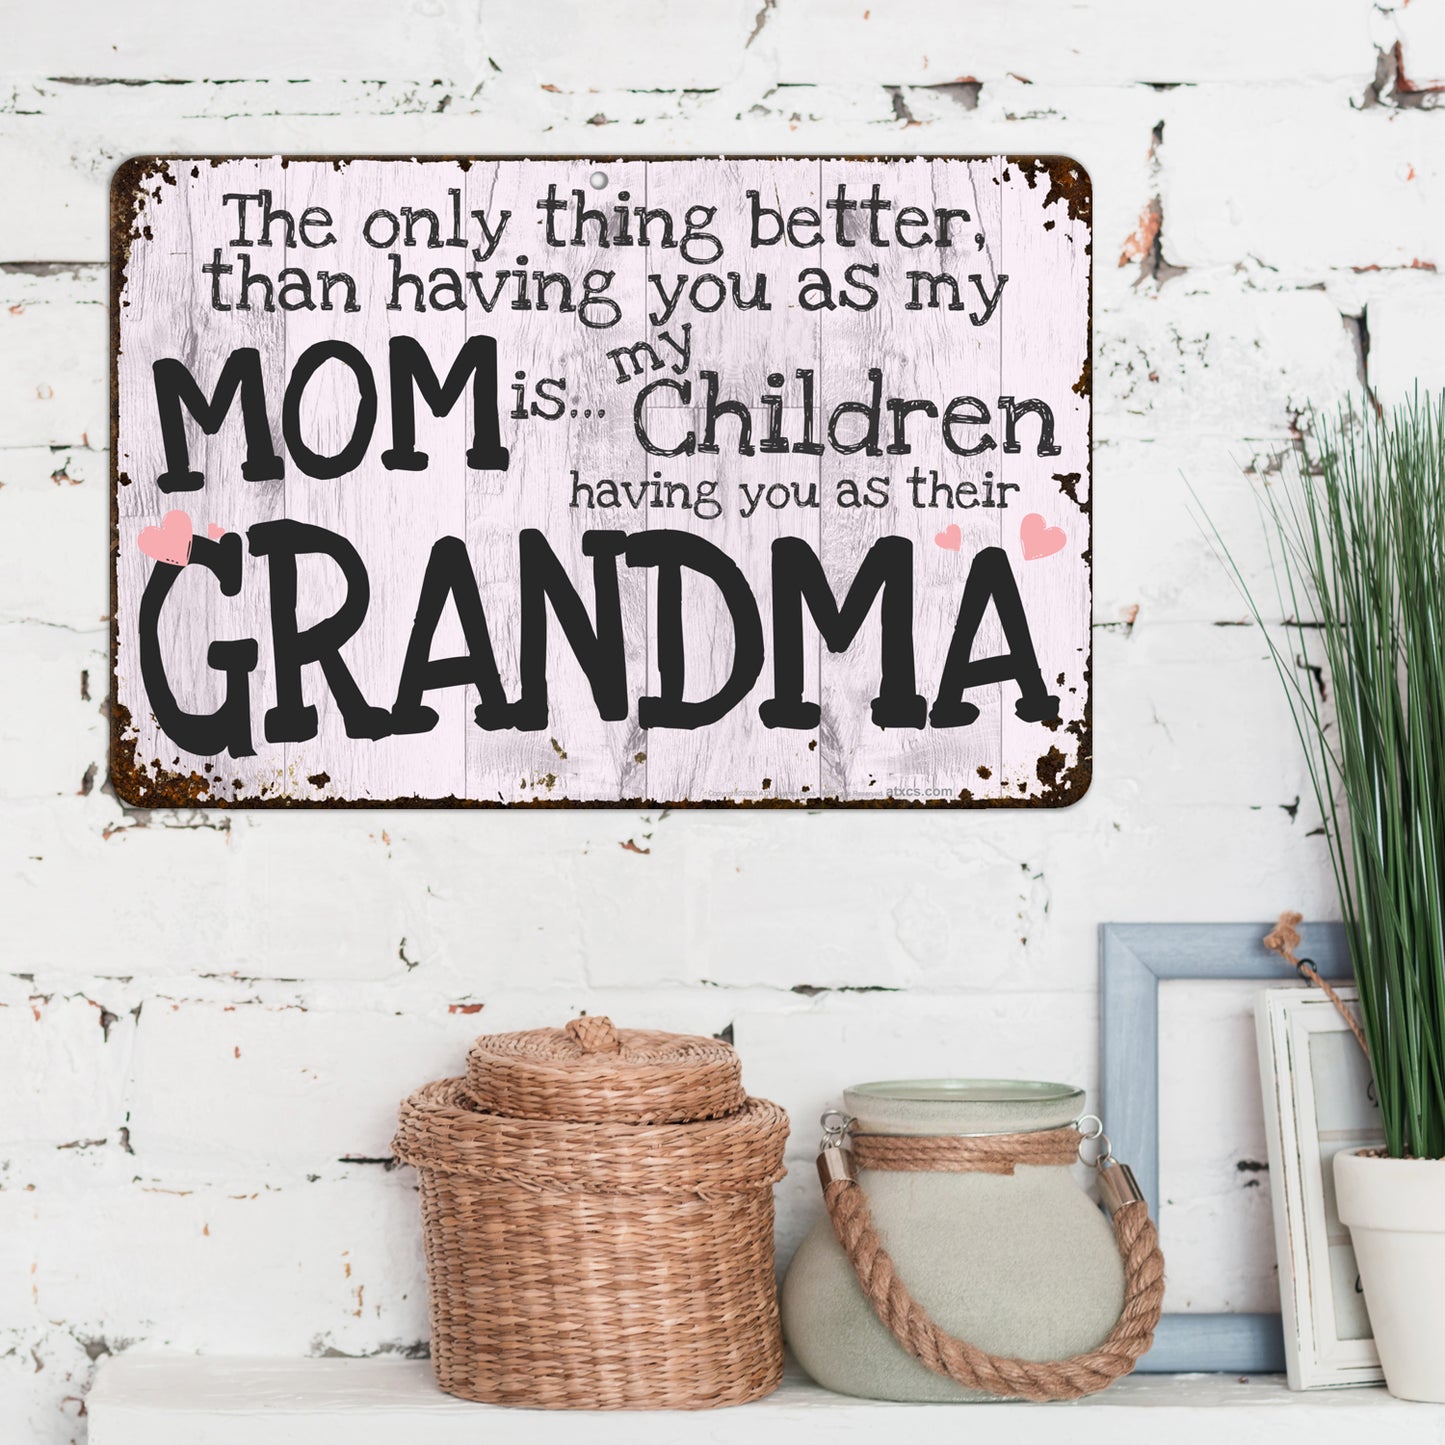 We Love you Grandma and Mom Sign The Only Thing Better Than Having You As My Mom Is My Children Having You As Their Grandma - Size 8 x 12